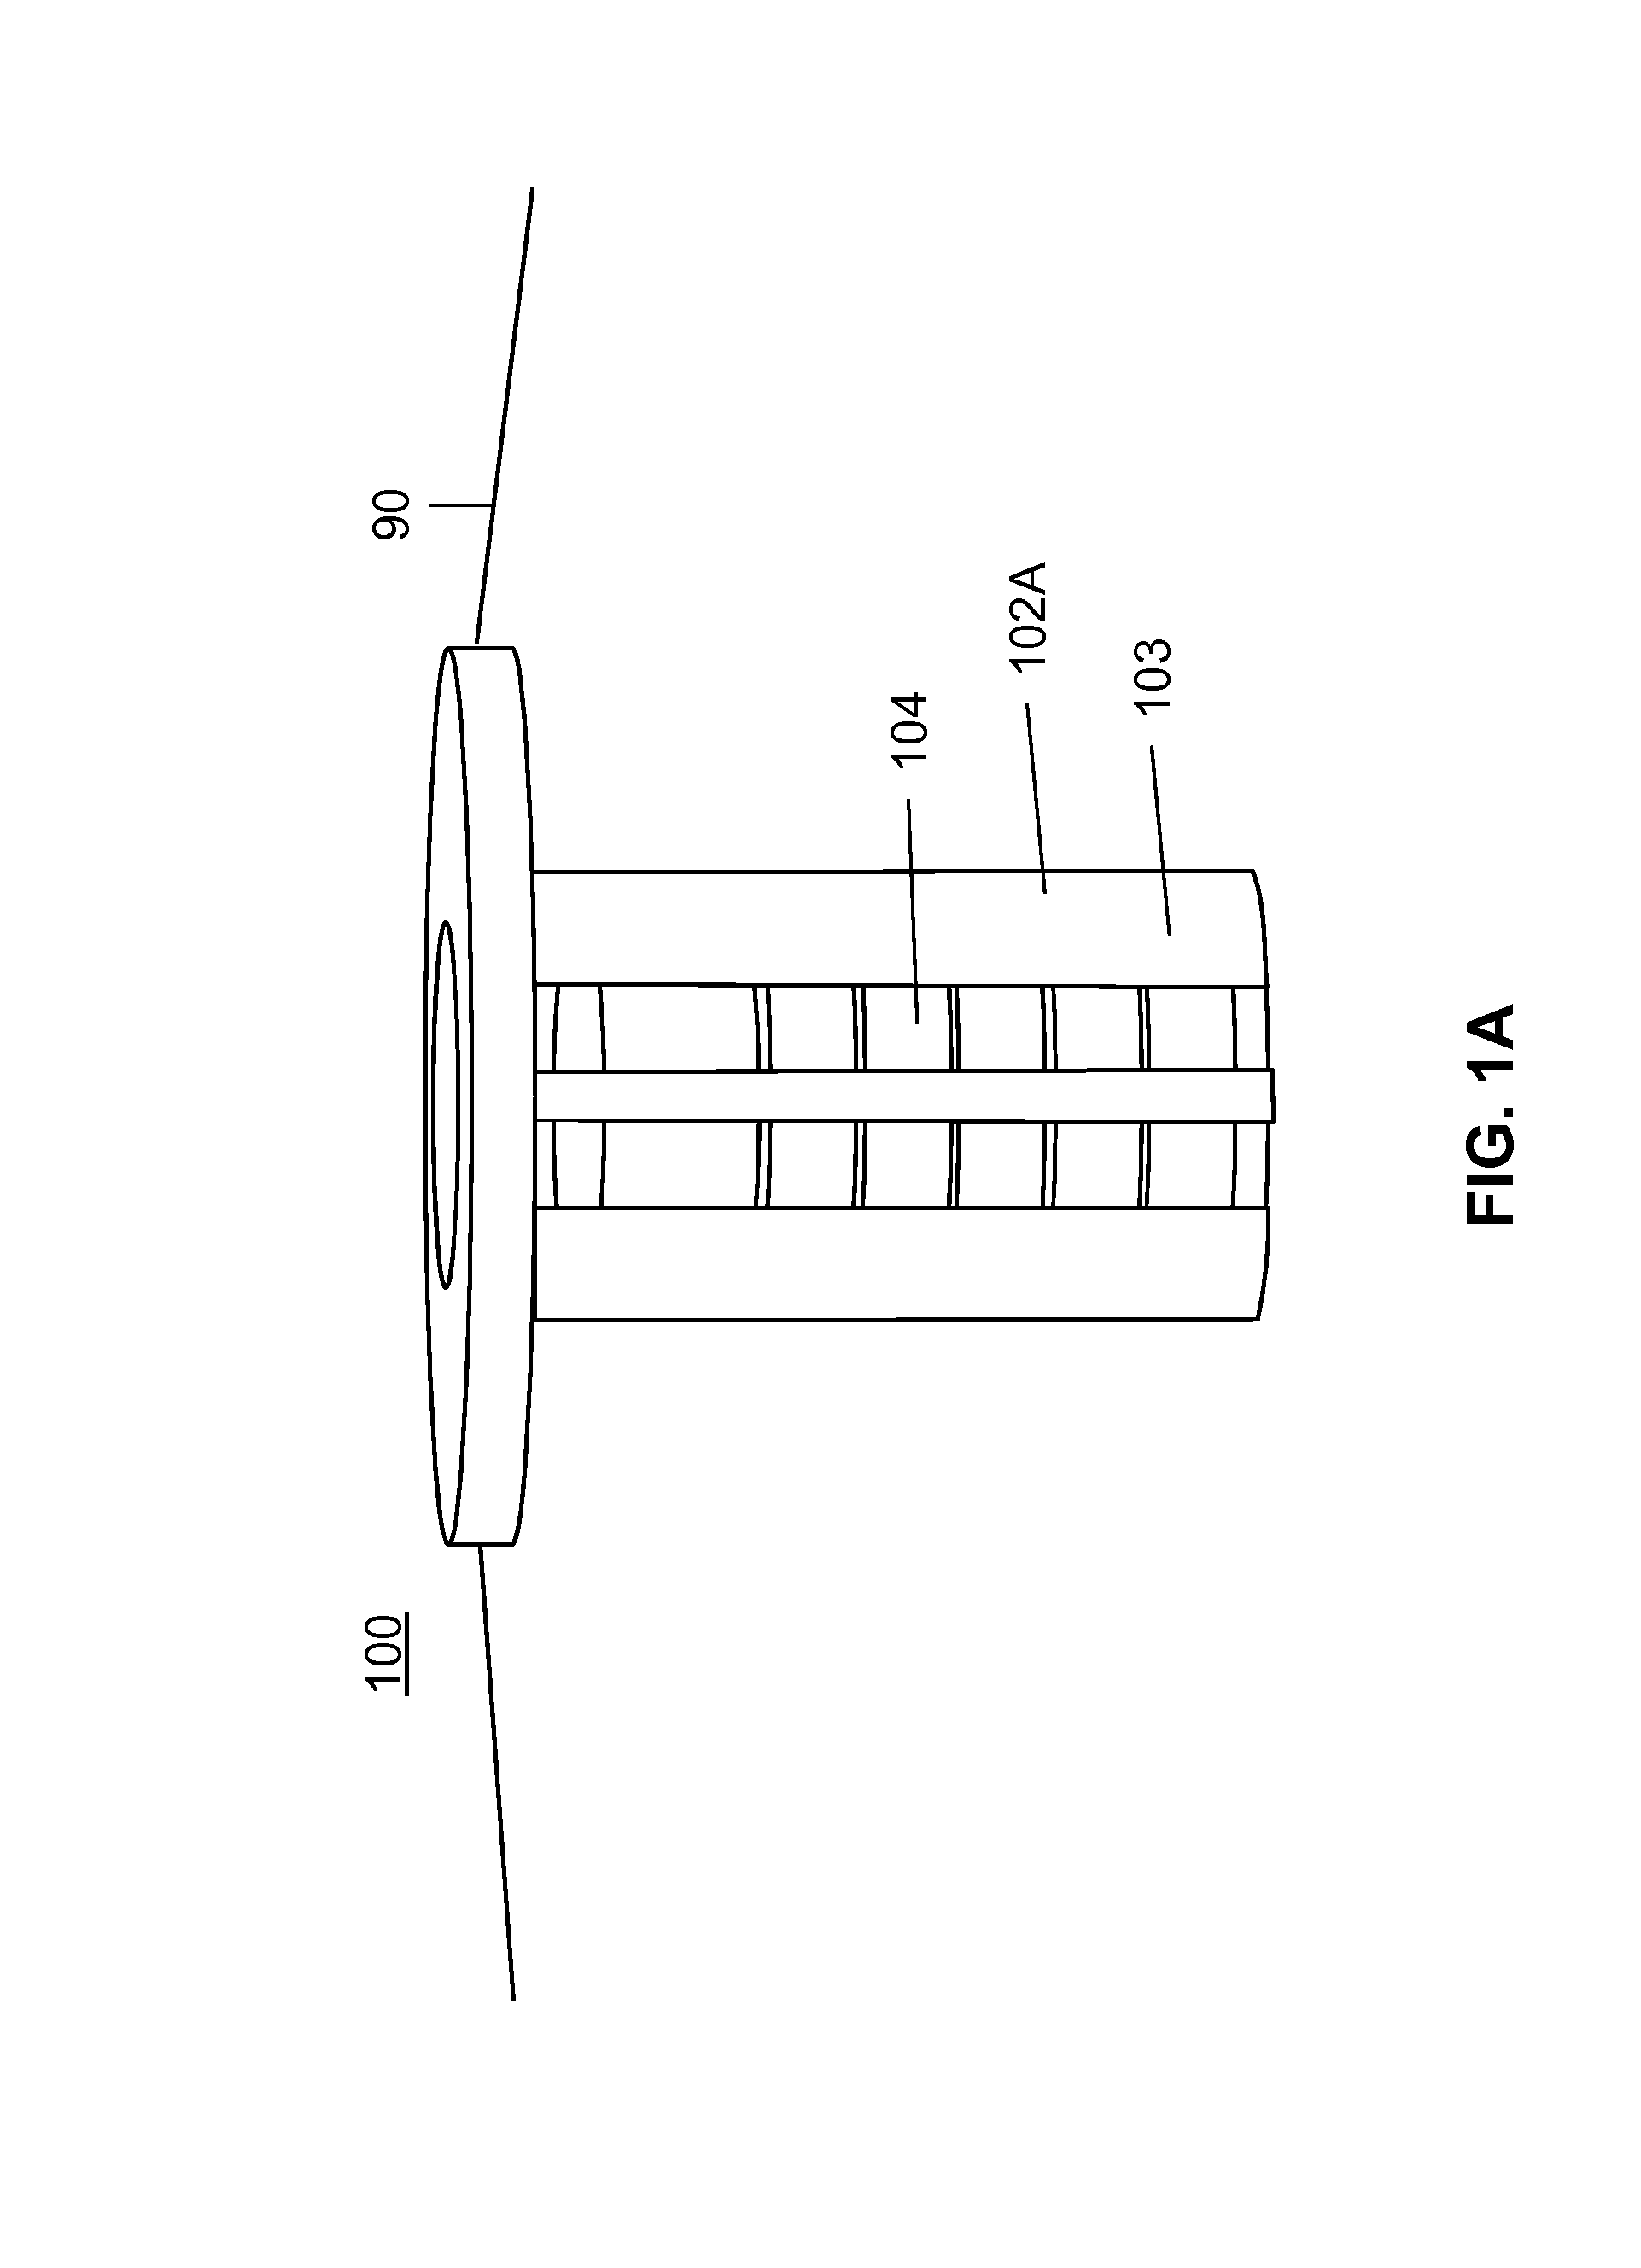 System and methods for pest reduction